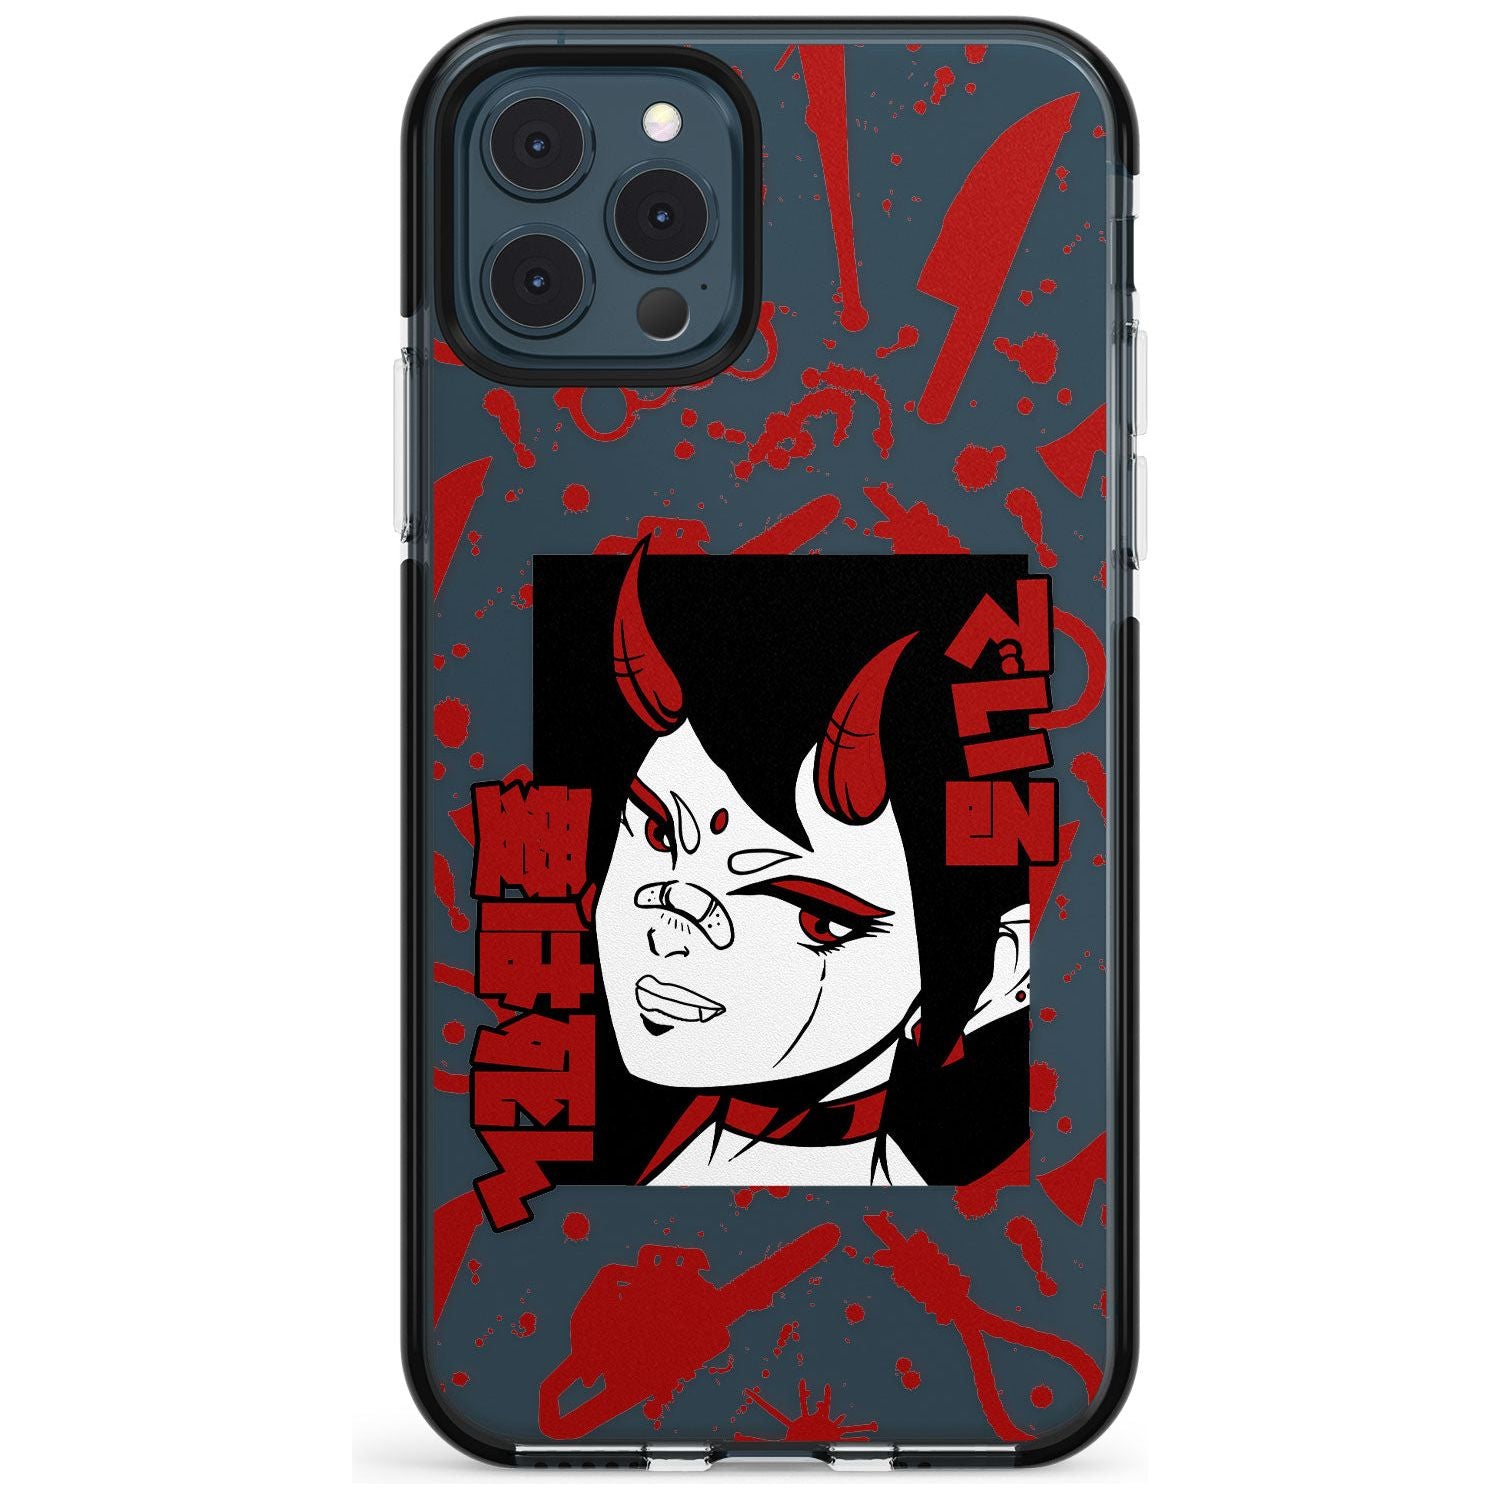 She's a Devil Black Impact Phone Case for iPhone 11